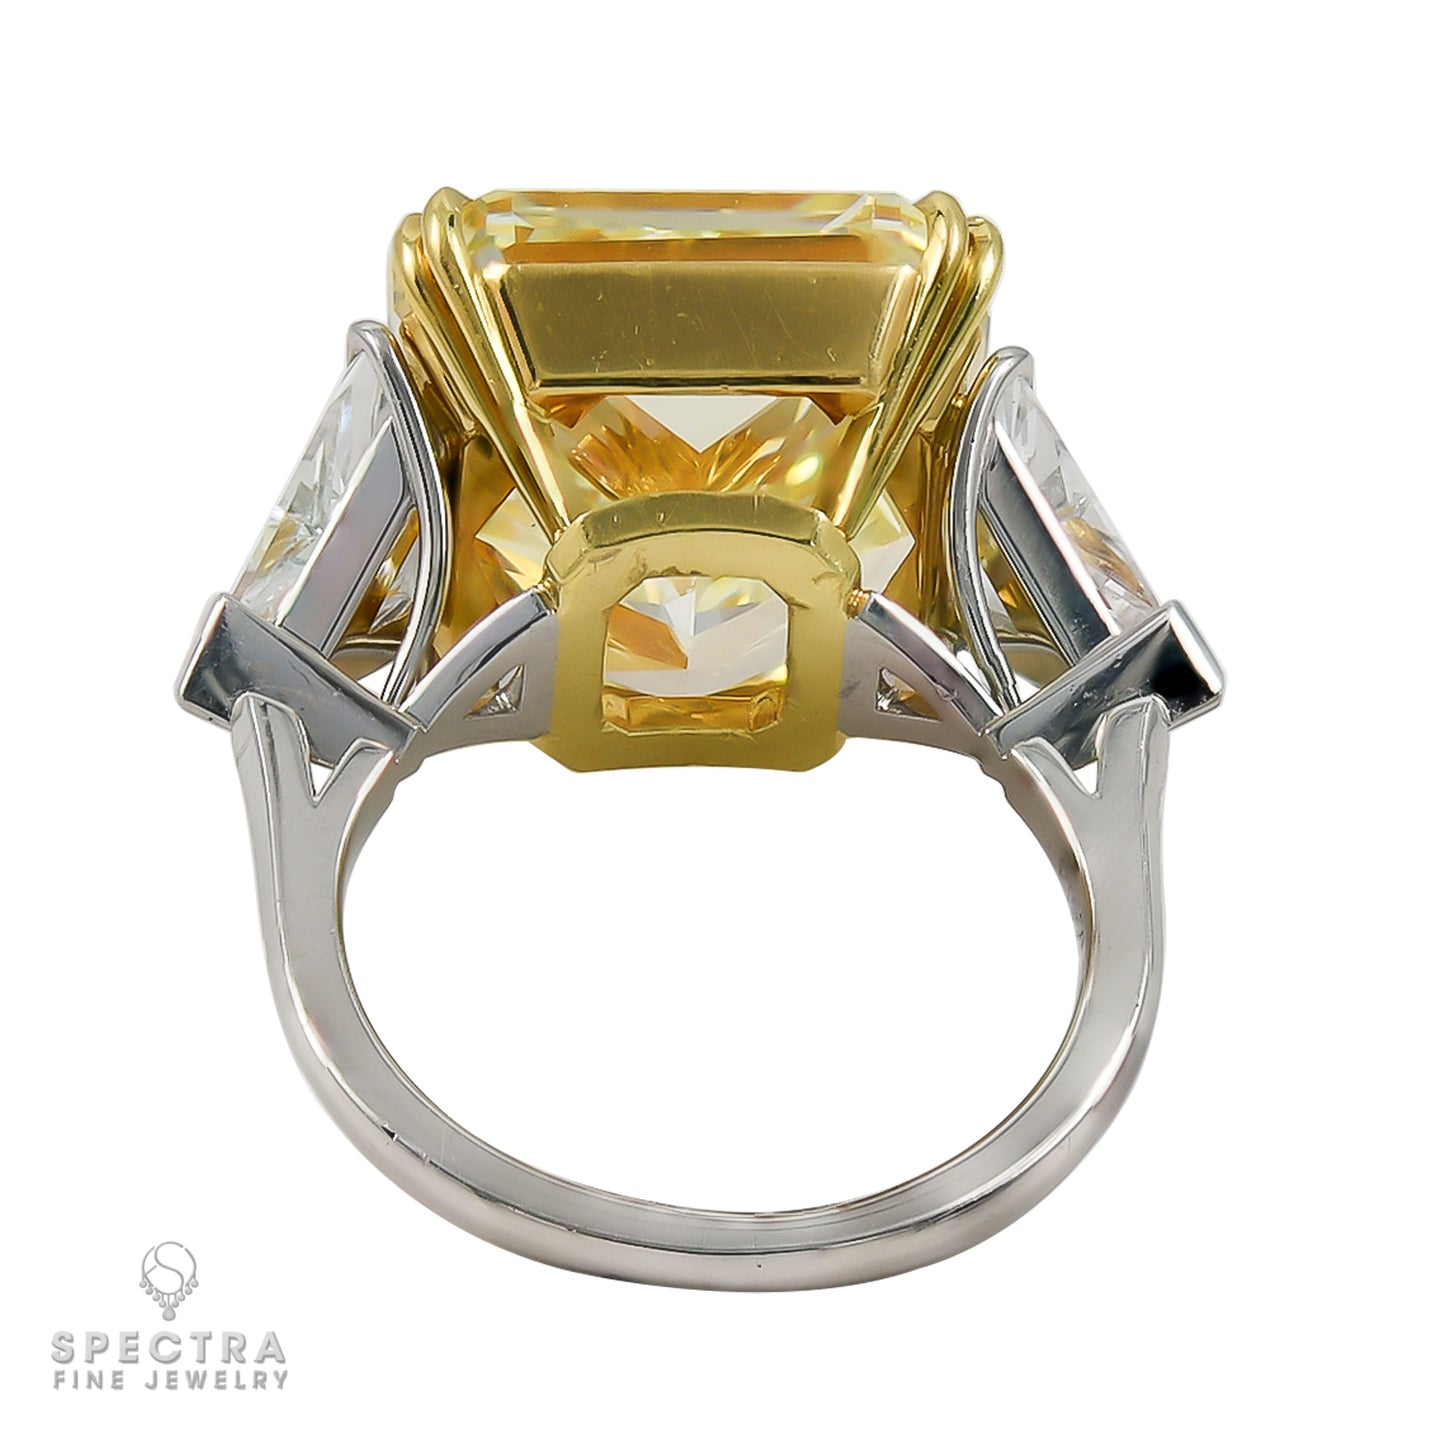 Spectra Fine Jewelry 20.11ct Canary Diamond Engagement Ring